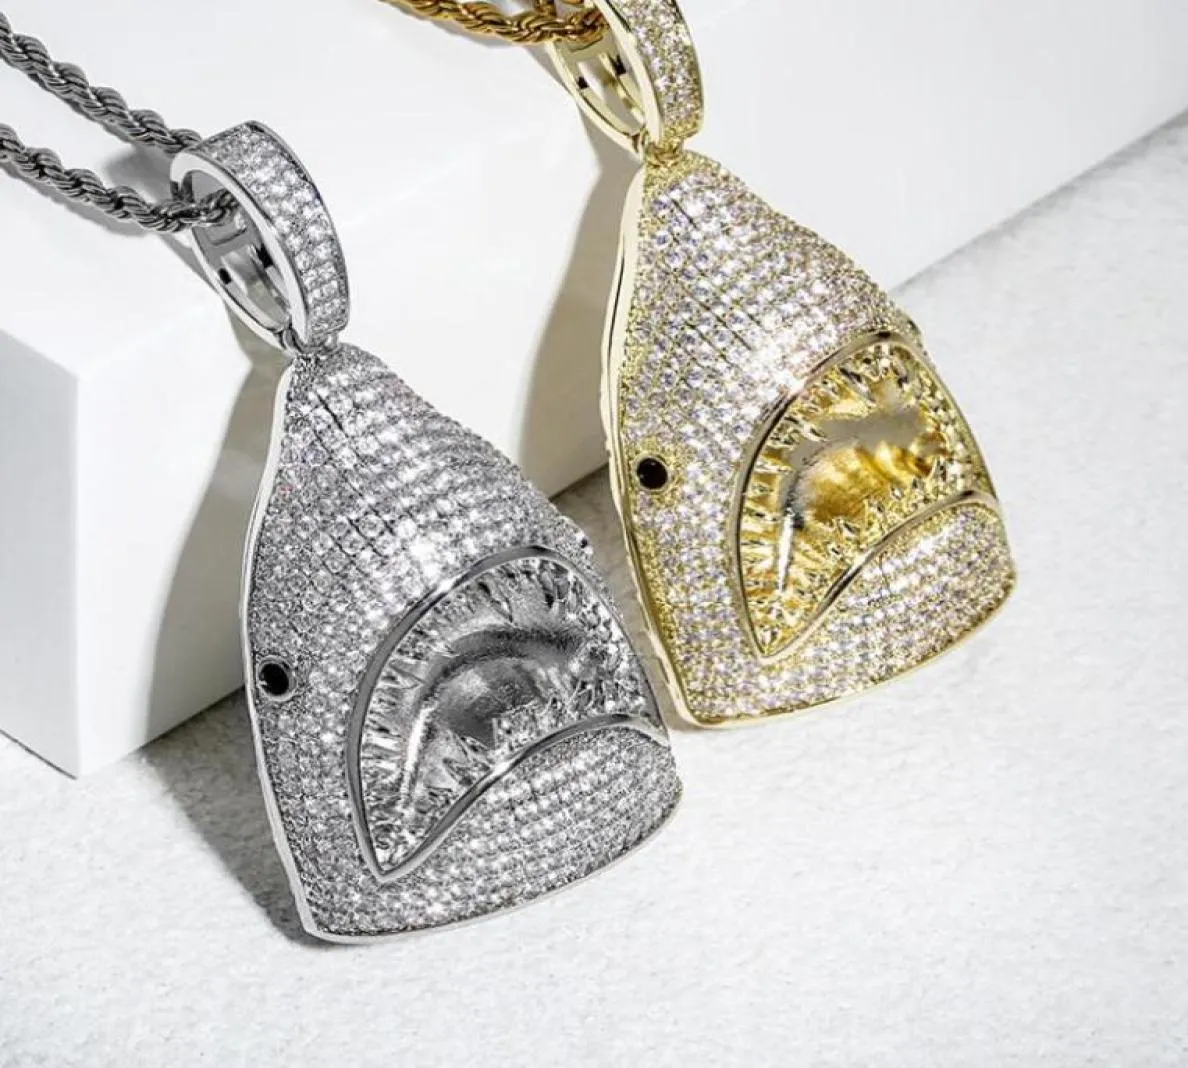 Hip hop pendant necklaces for men women luxury designer mens bling diamond gold chain necklace jewelry love gift6080910